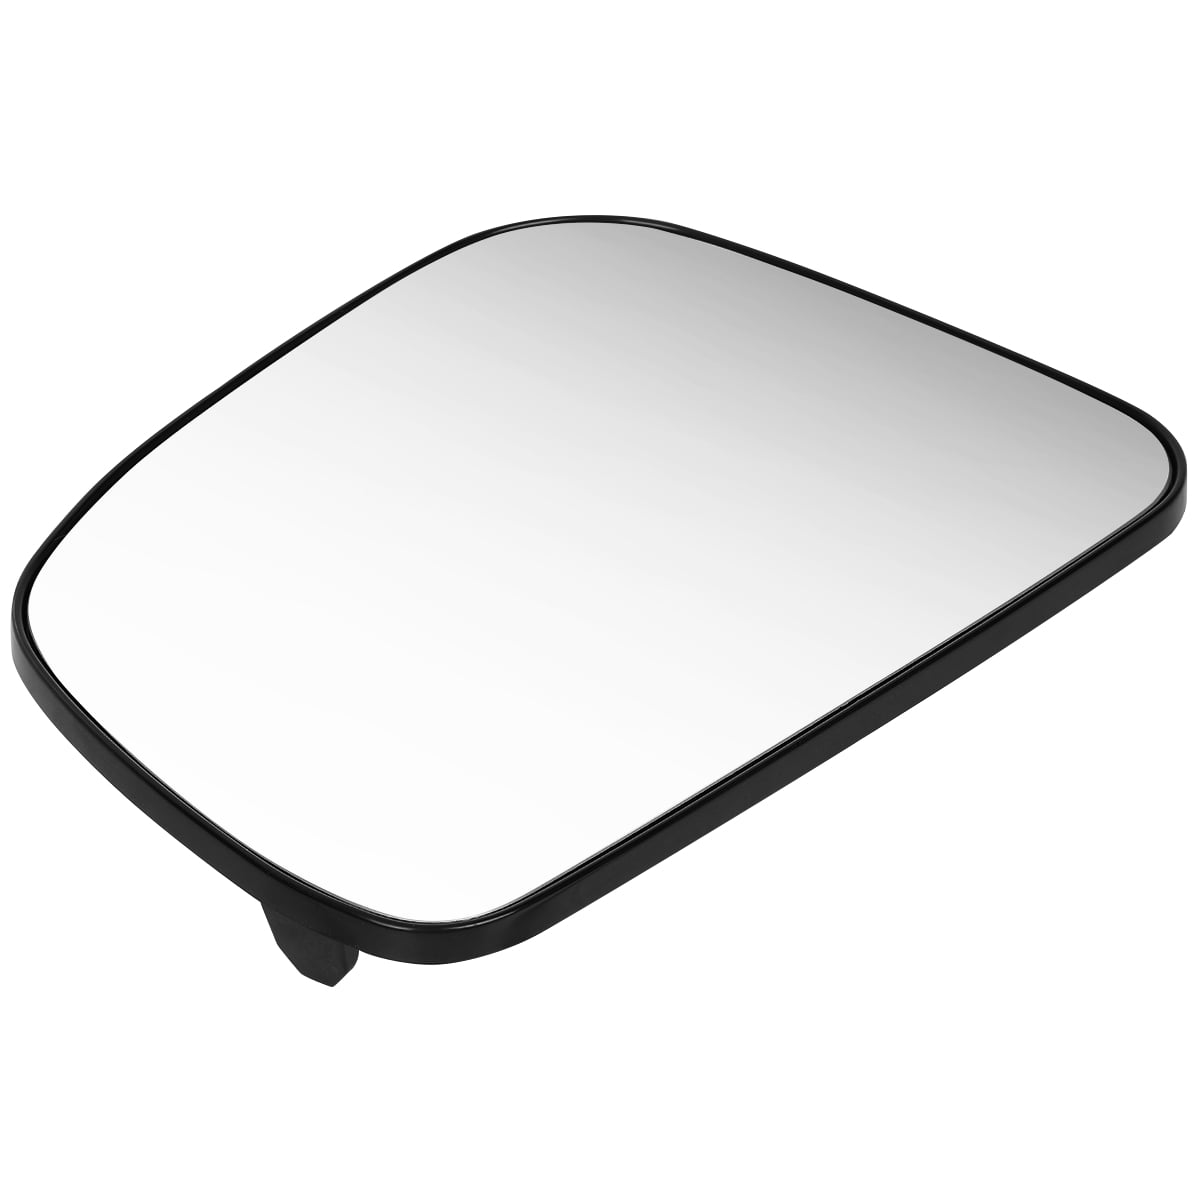 DNA Motoring OEM-MG-0432 96366EL10A OE Style Driver/Left Mirror Glass For 2007-2012 NISSAN VERSA 